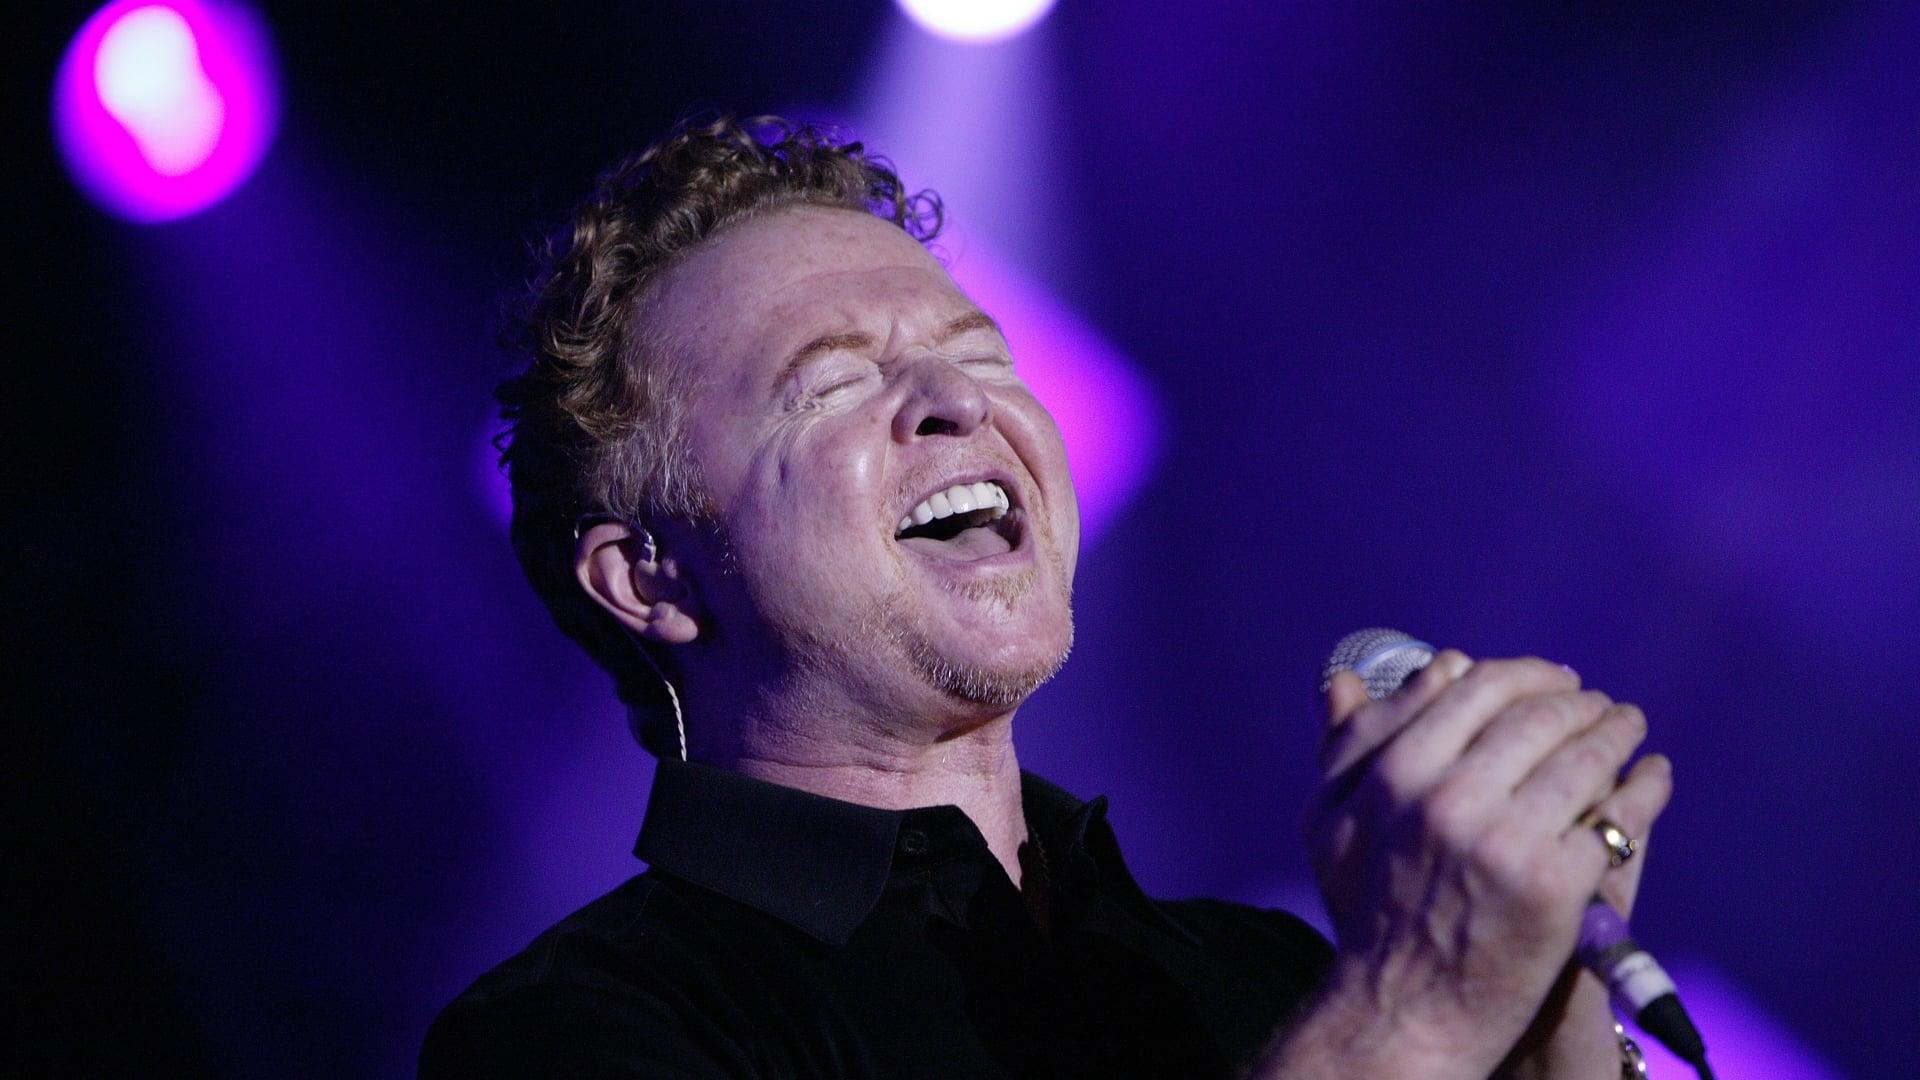 Simply Red: Live at Montreux 2003 backdrop